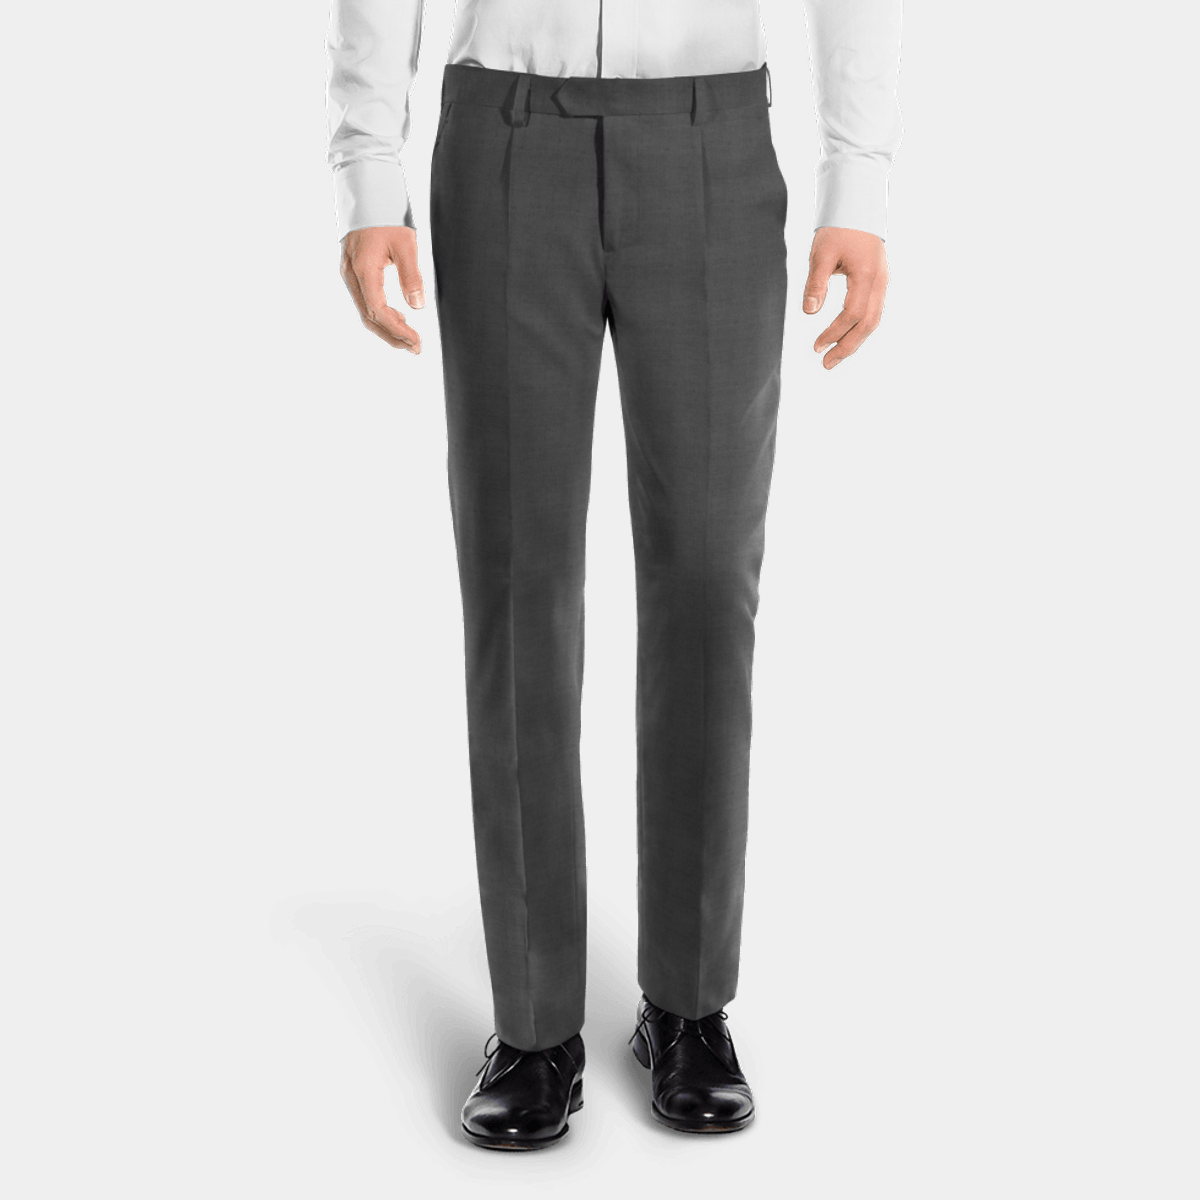 Grey Pure wool pleated Trousers for men $99 | Hockerty